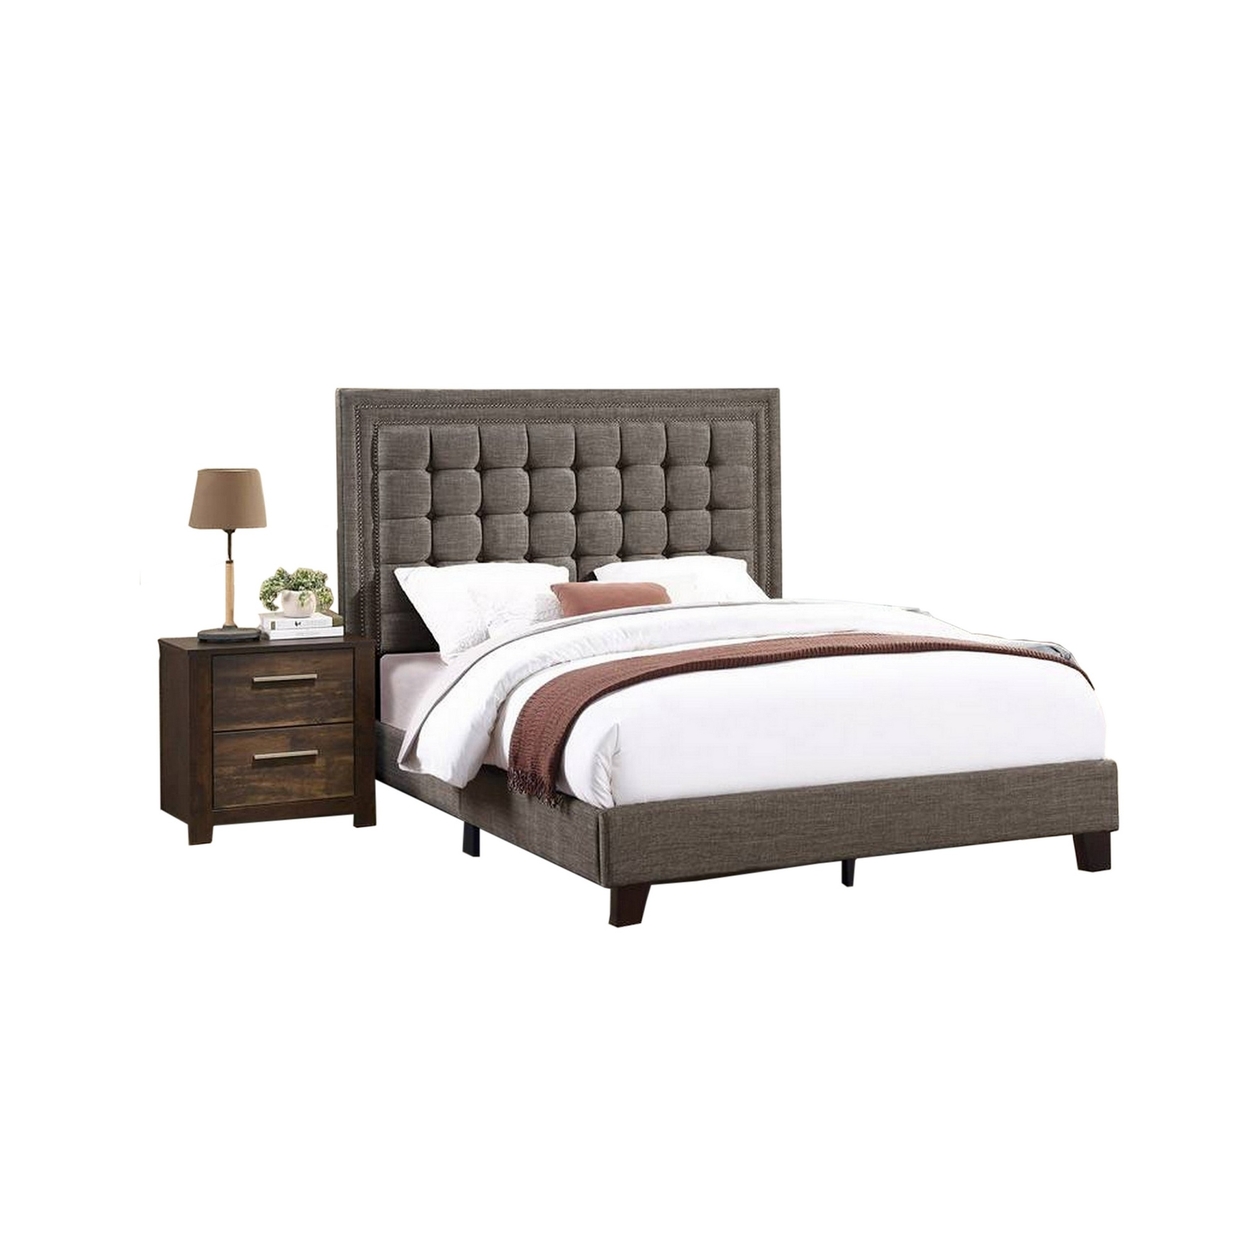 Zofi Modern Full Size Bed, Deep Square Tufted Upholstery, Taupe Polyester- Saltoro Sherpi